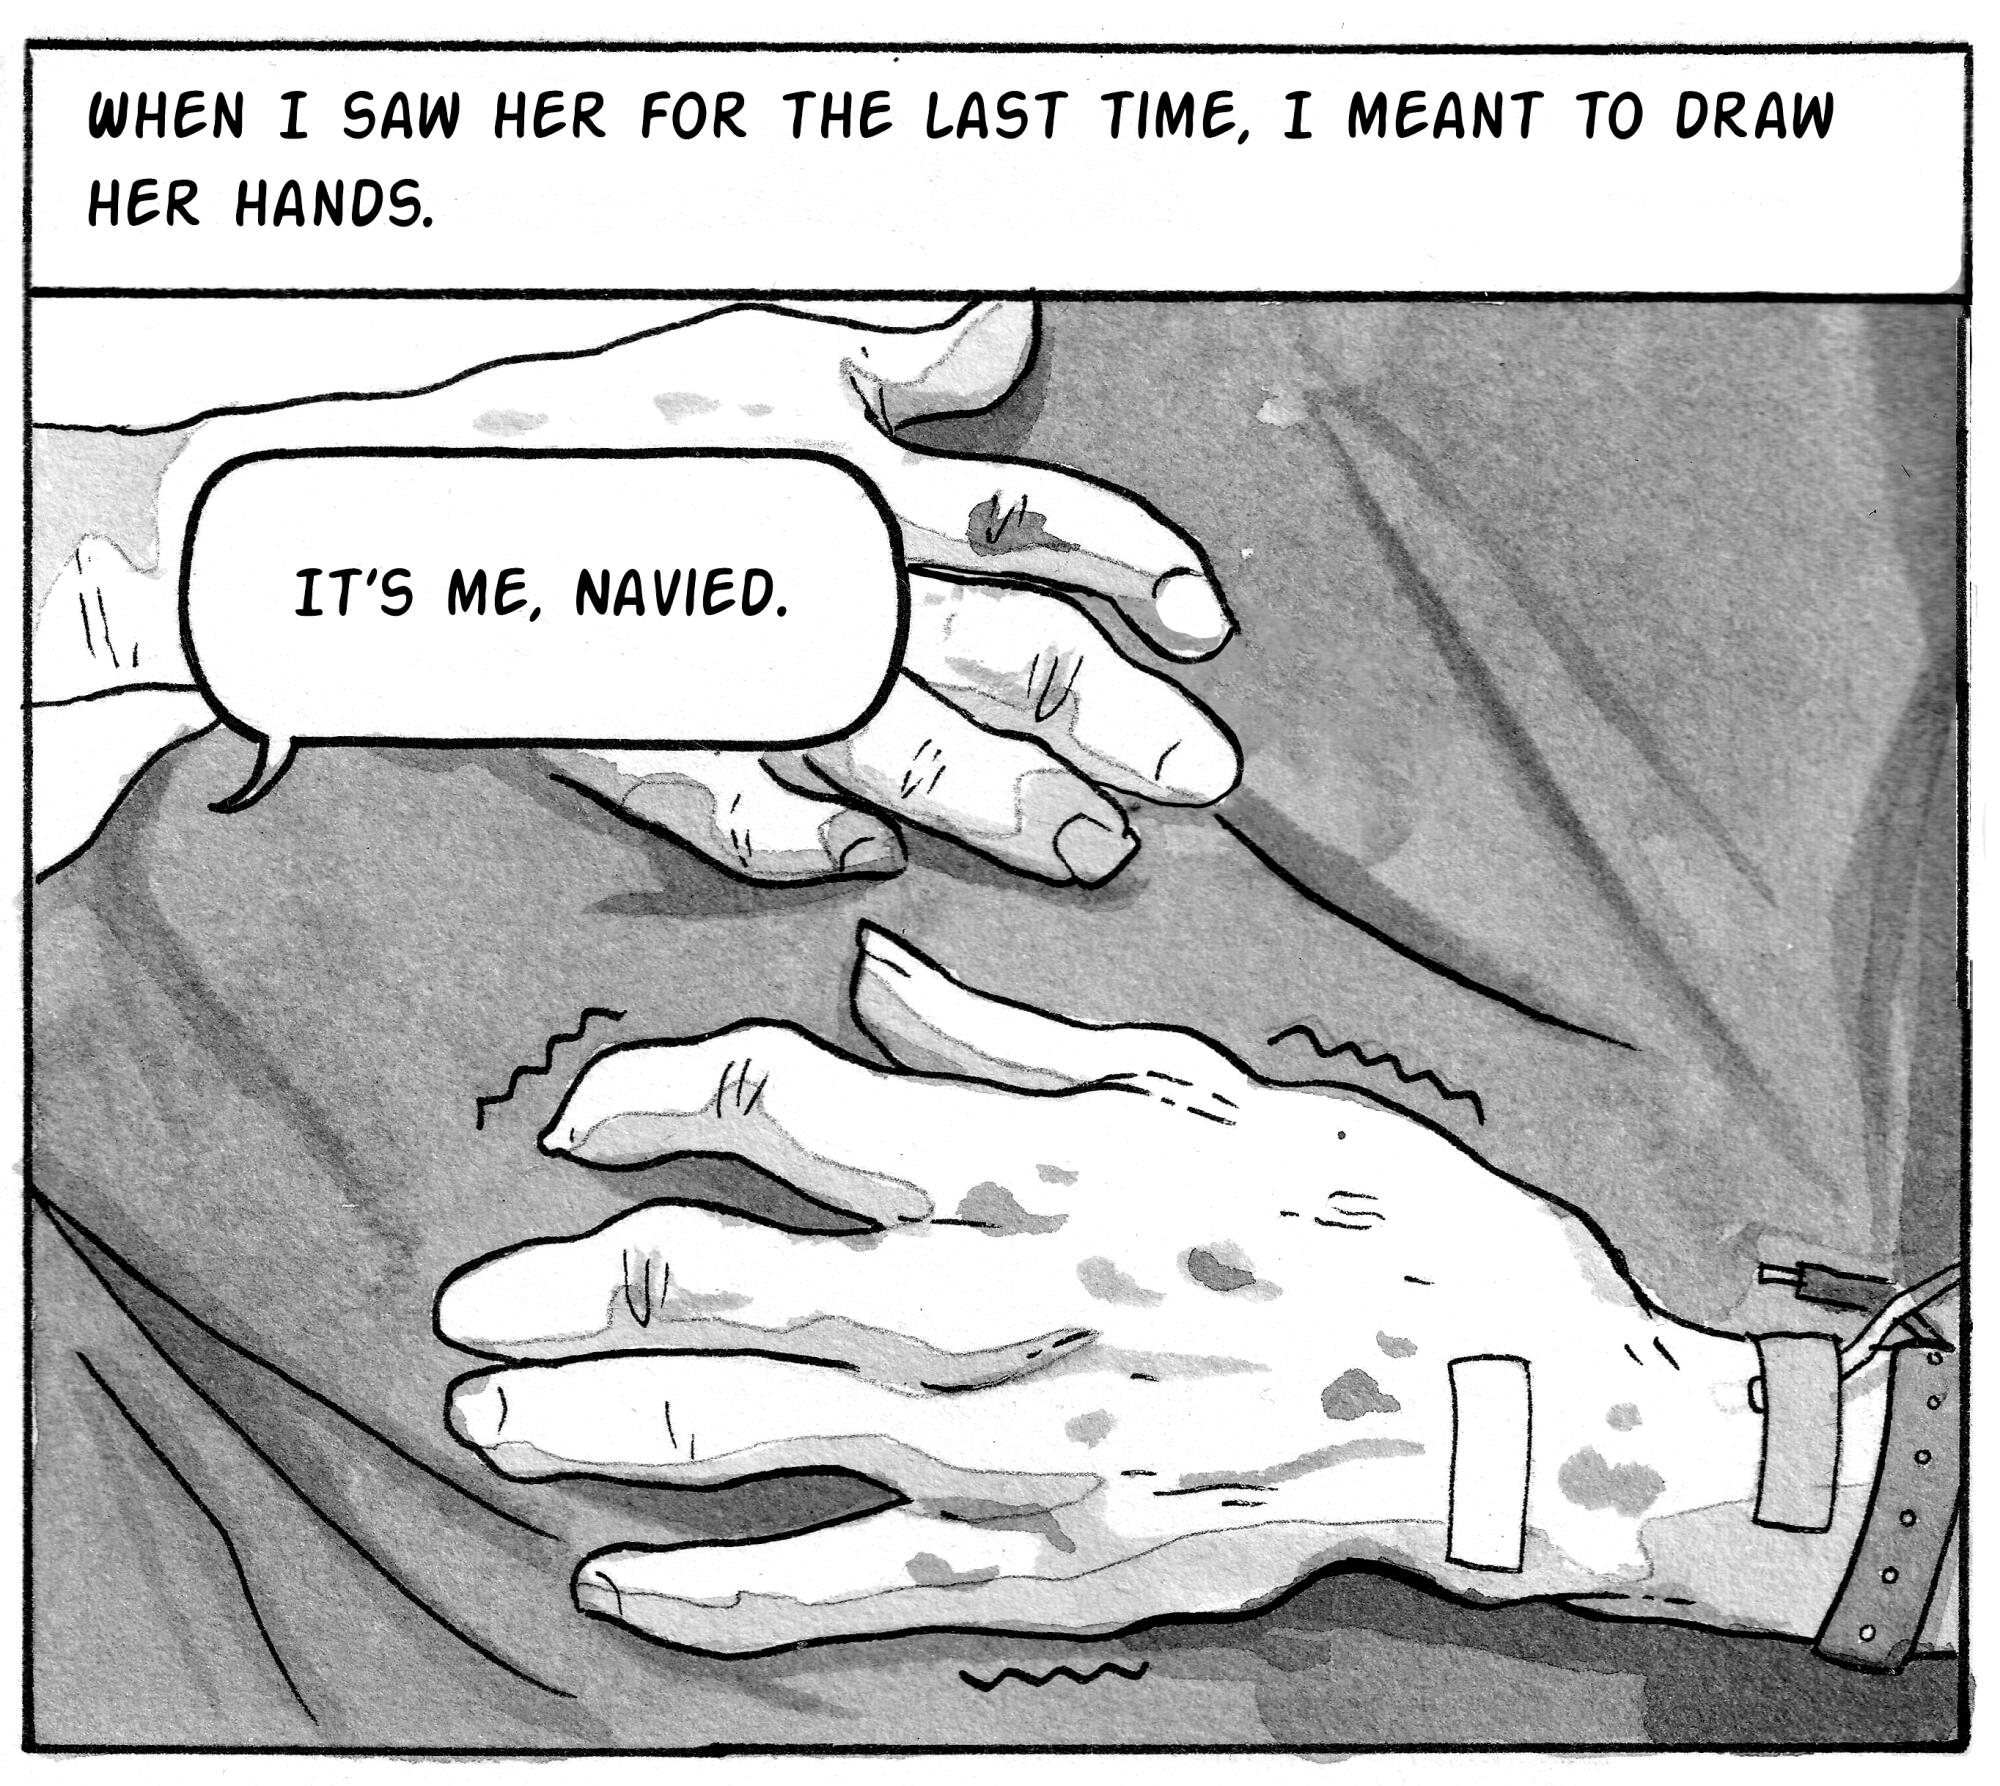 When I saw her for the last time, I meant to draw her hands. "It's me, Navied." [Image of hands hugging someone's back]